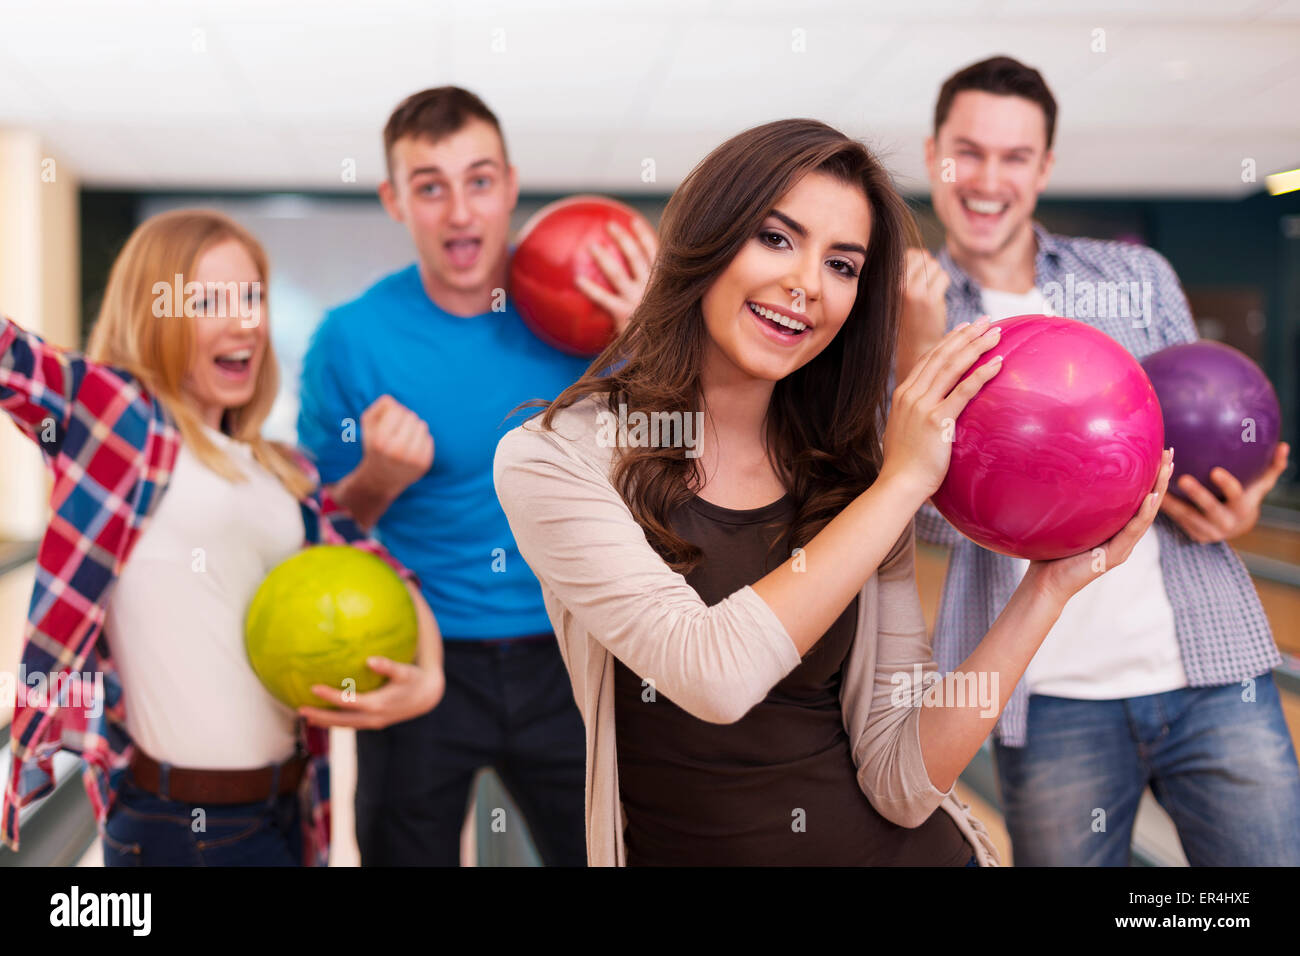 Friends bowling together Stock Photo